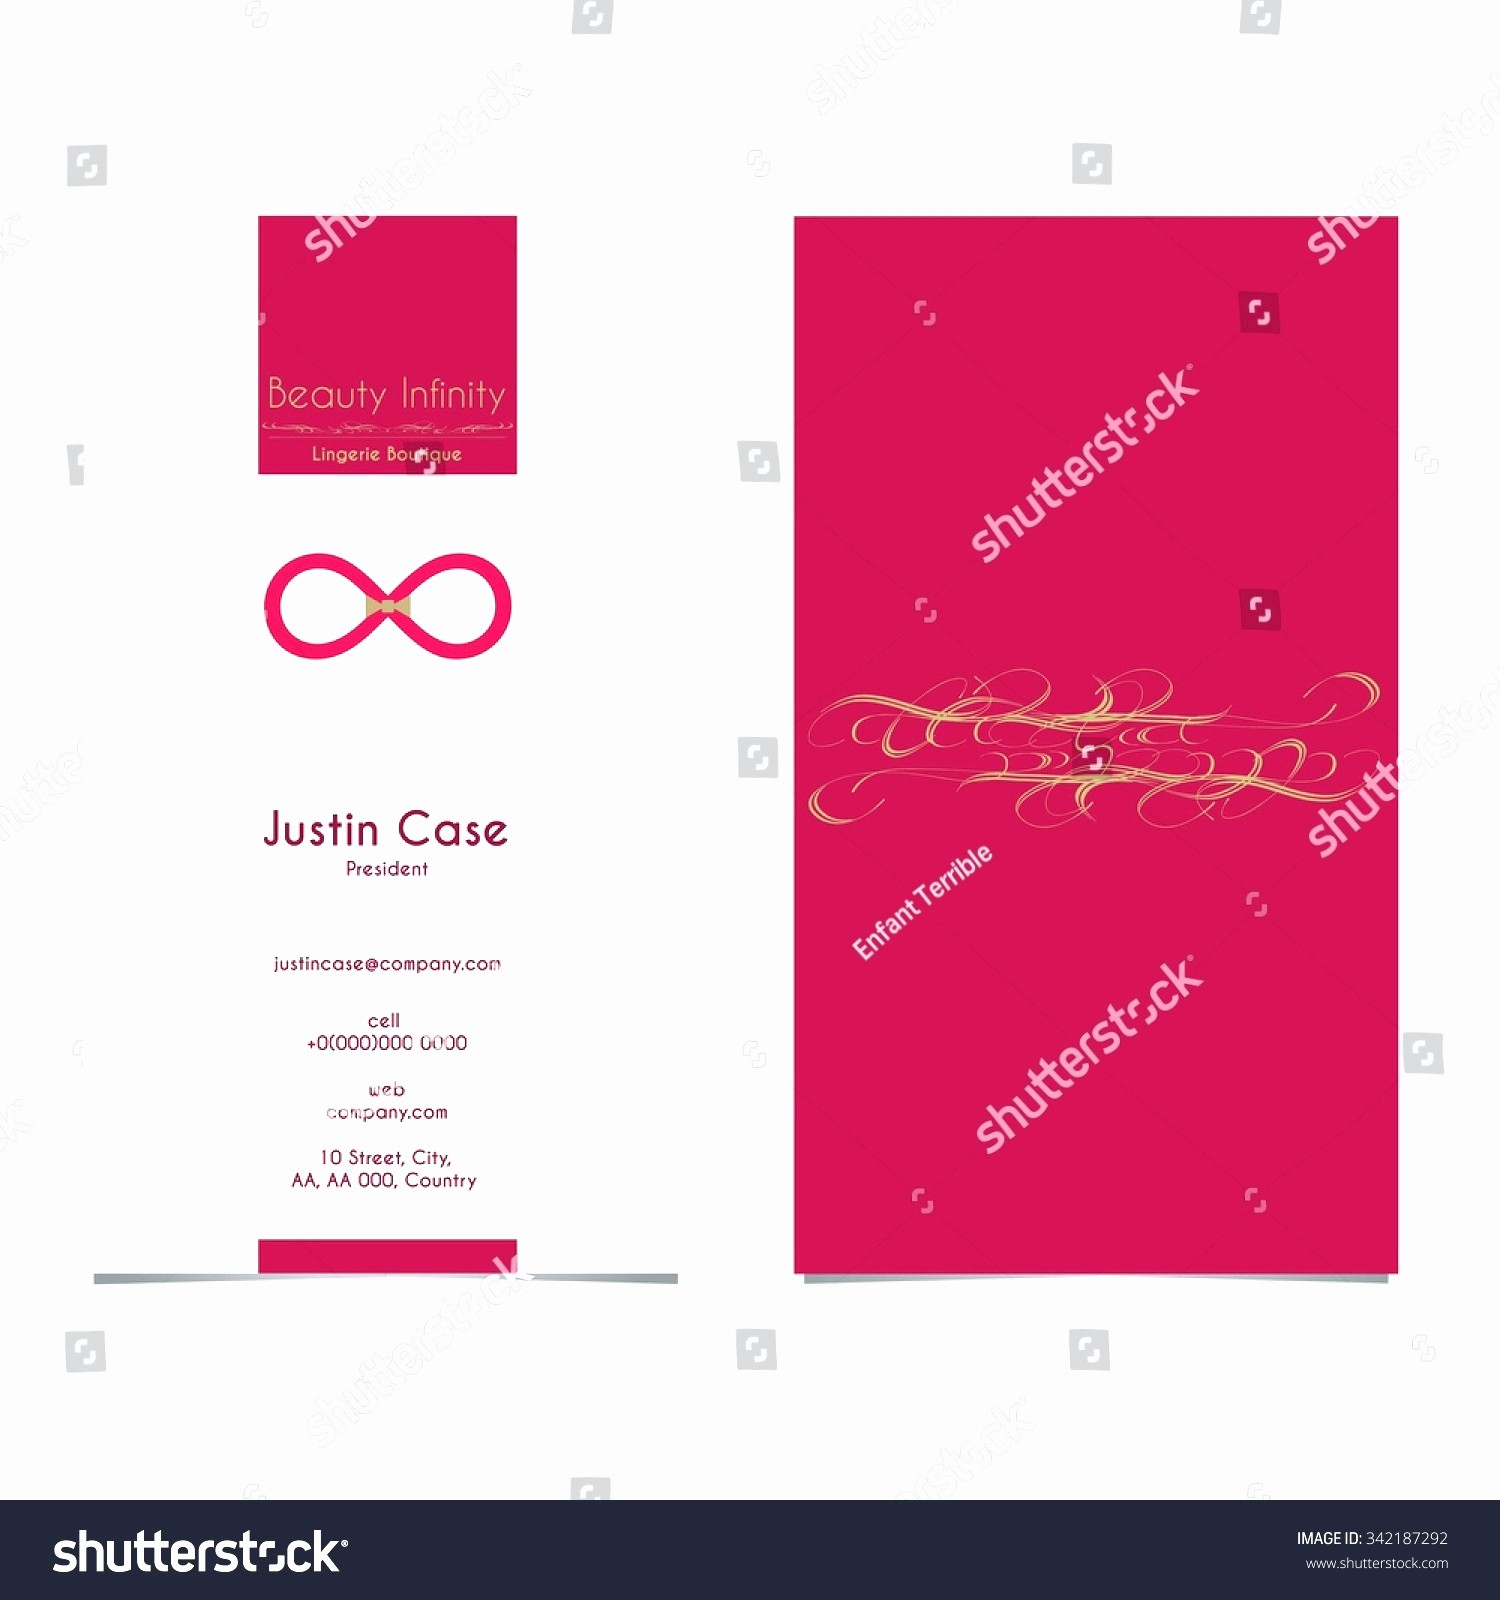 Rideshare Business Cards Inspirational Lyft Card Template Awesome